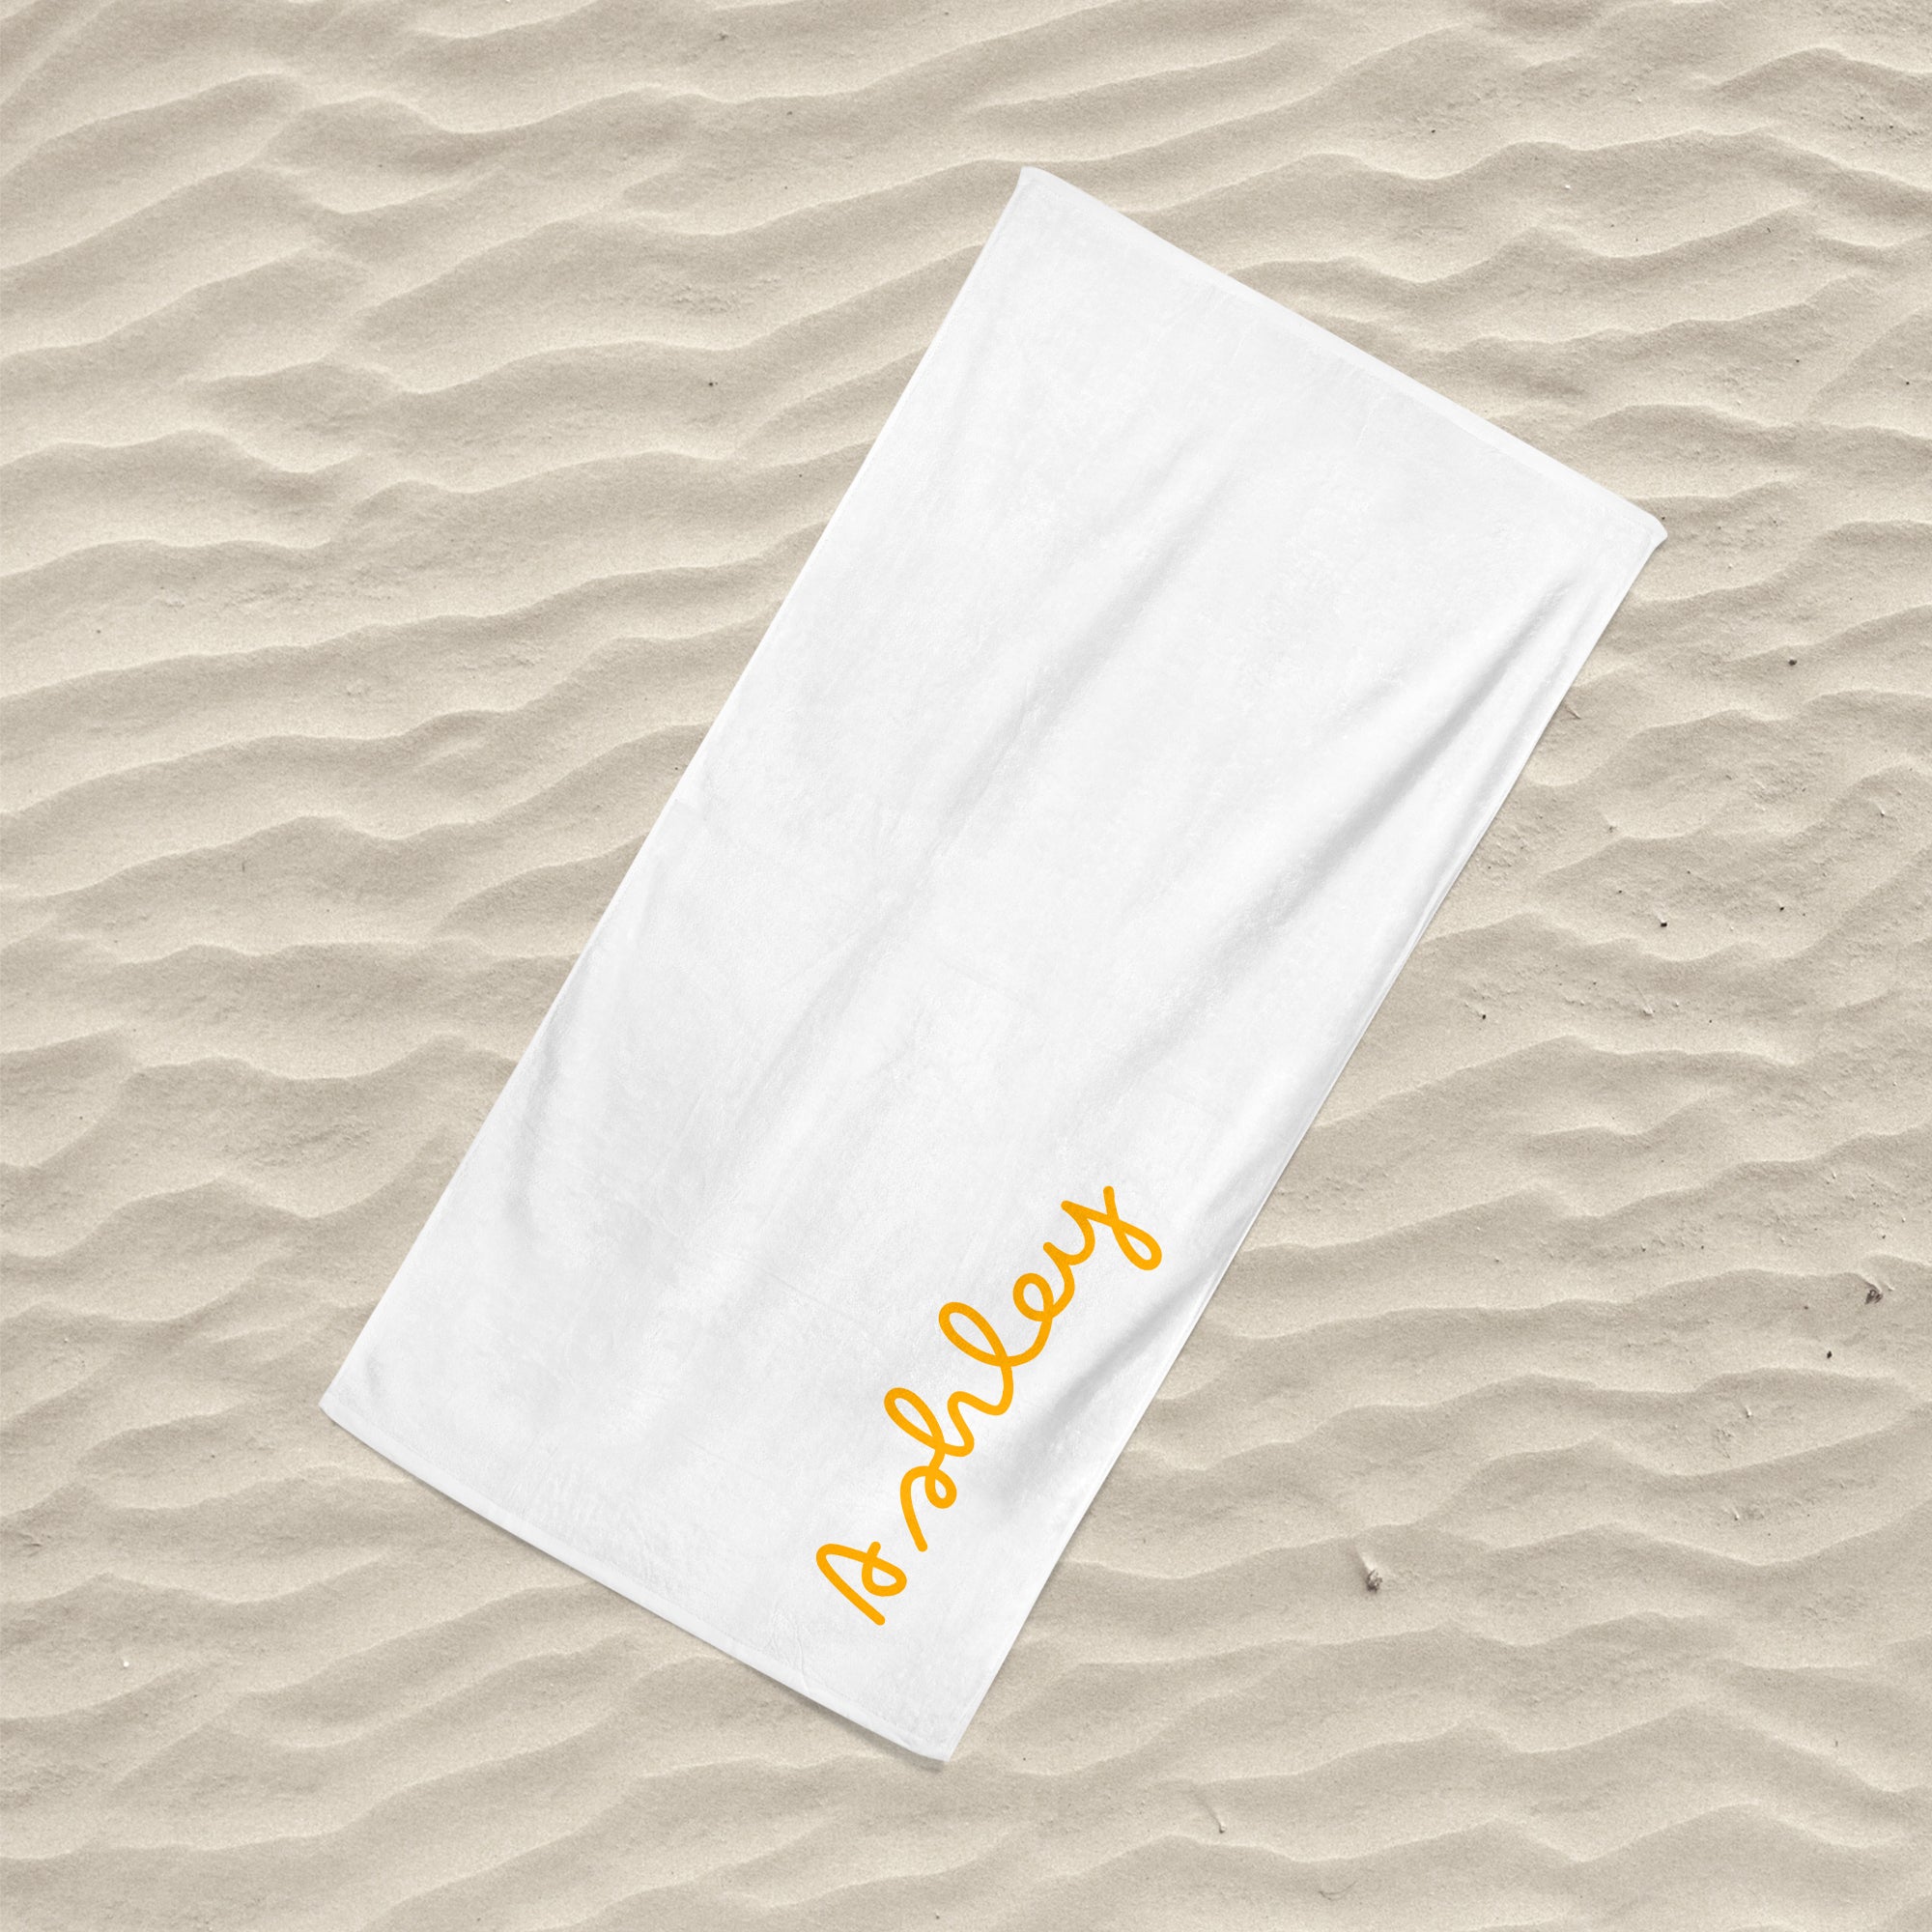 Island Inspired Large Beach Towel Orange on White - Personalise with Name